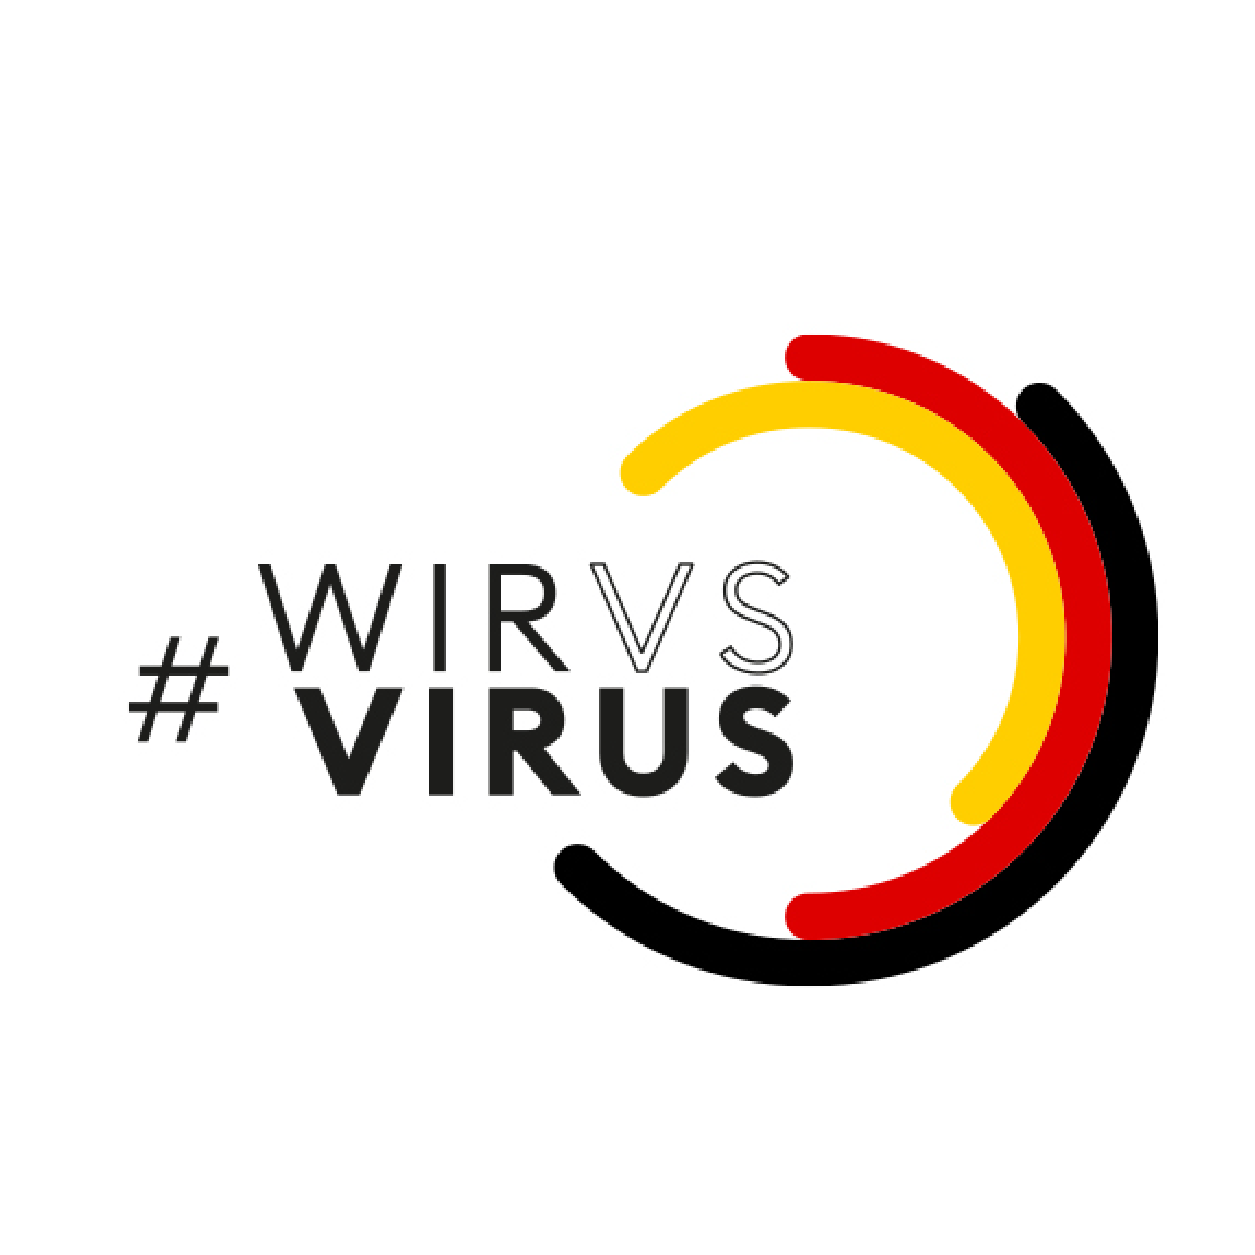 My Participation at the #wirVsVirus Hackathon